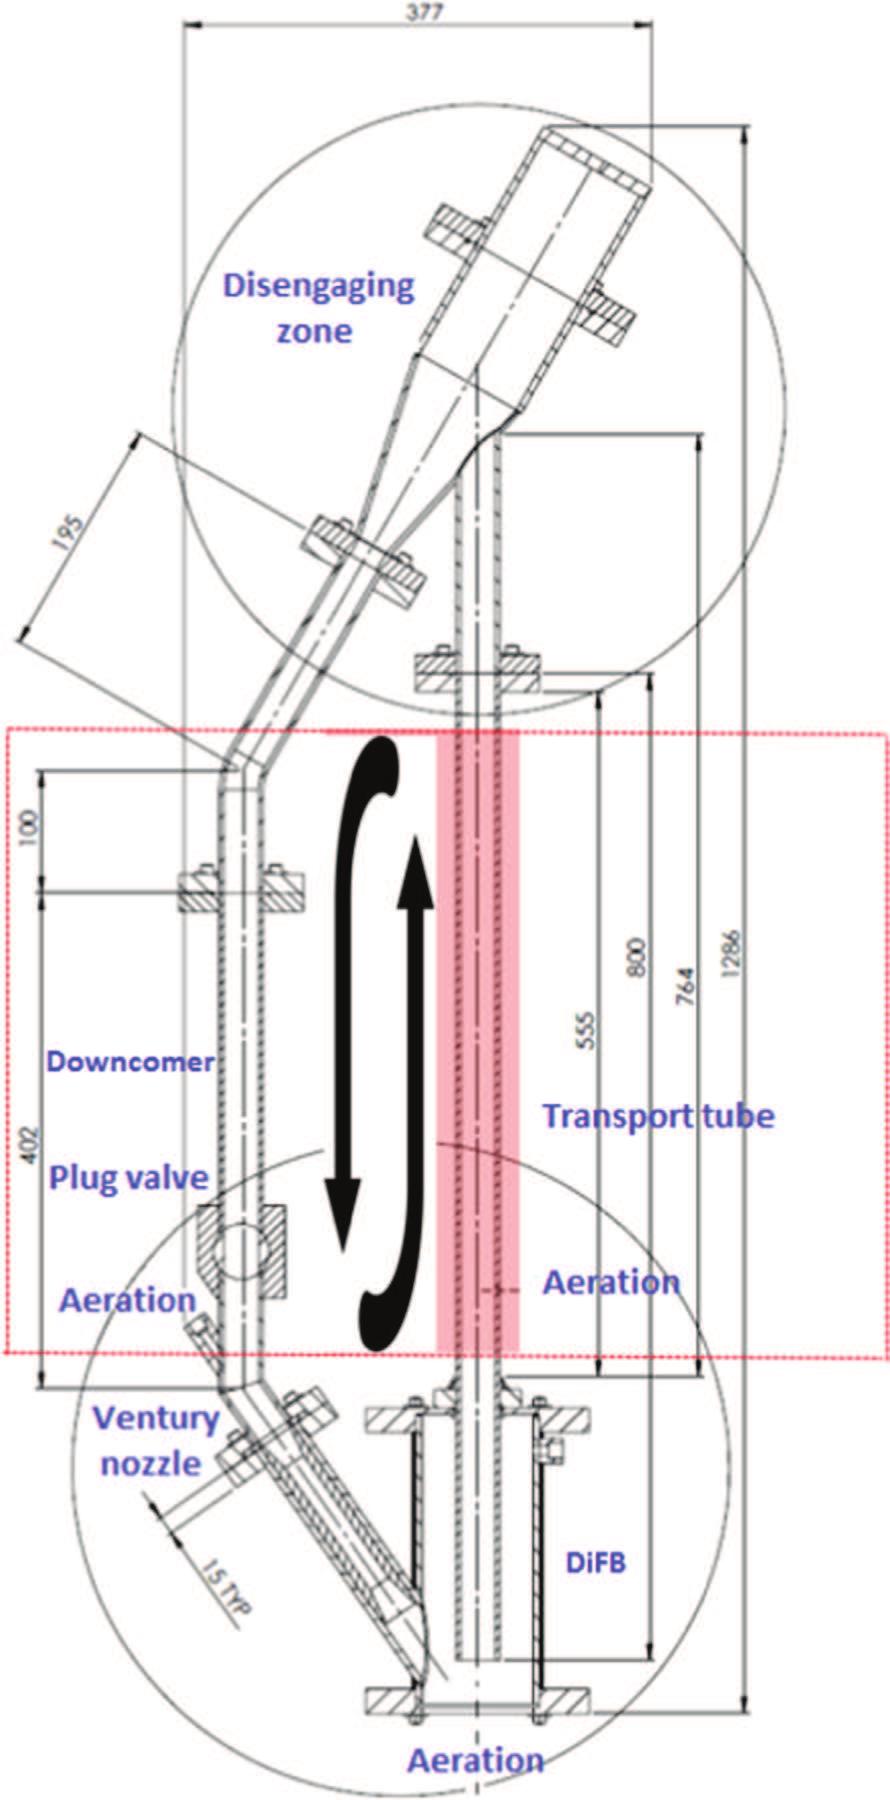 In the application, the heat transfer medium flows through multiple parallel vertical tubes.